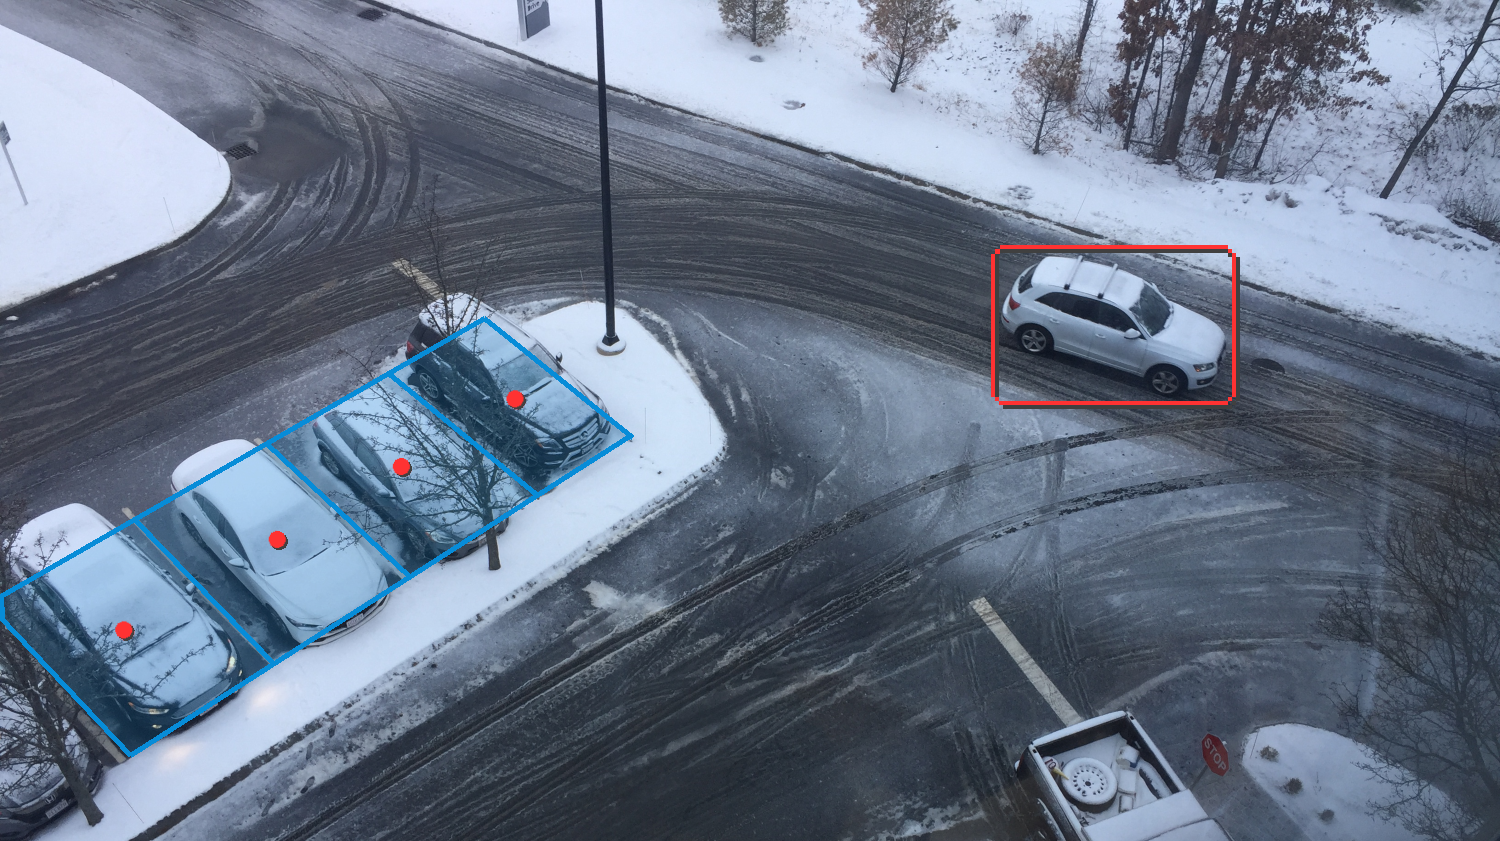 Parking spot monitoring in snowy weather.